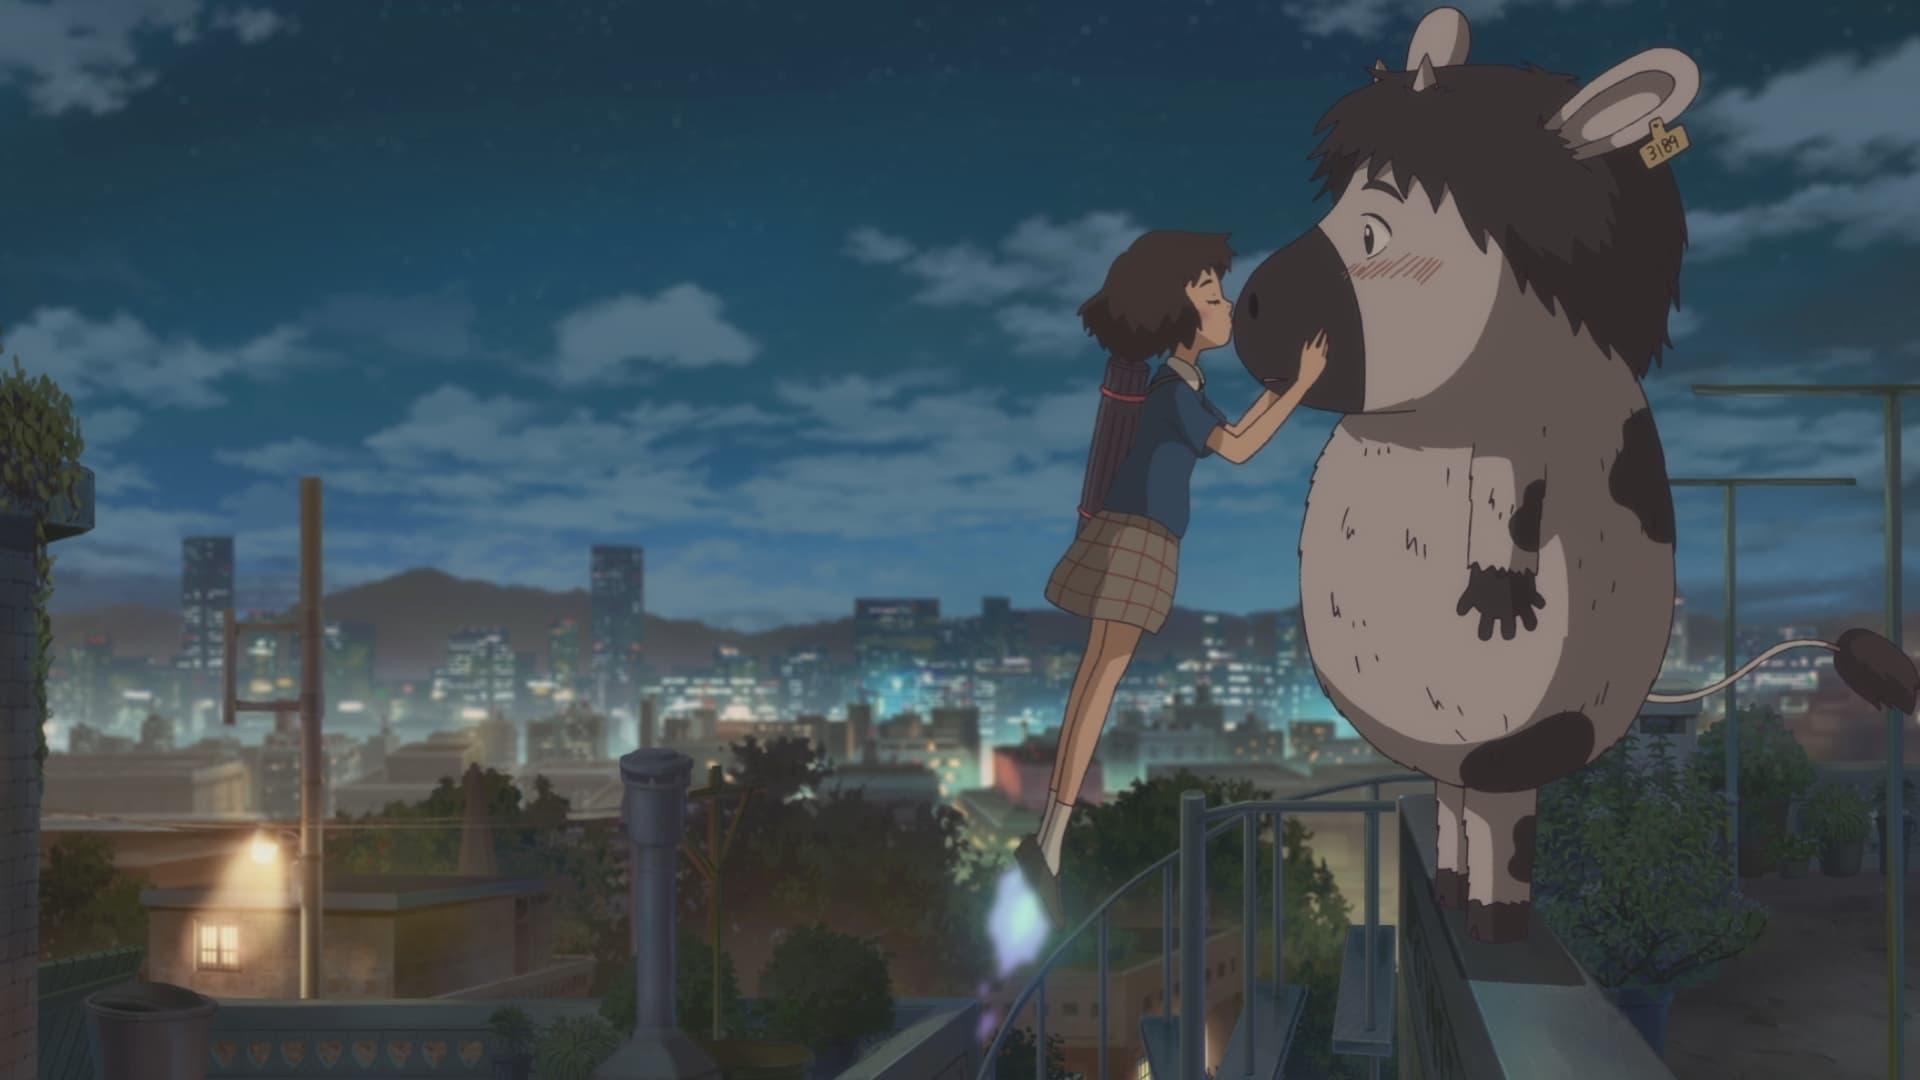 The Satellite Girl and Milk Cow backdrop